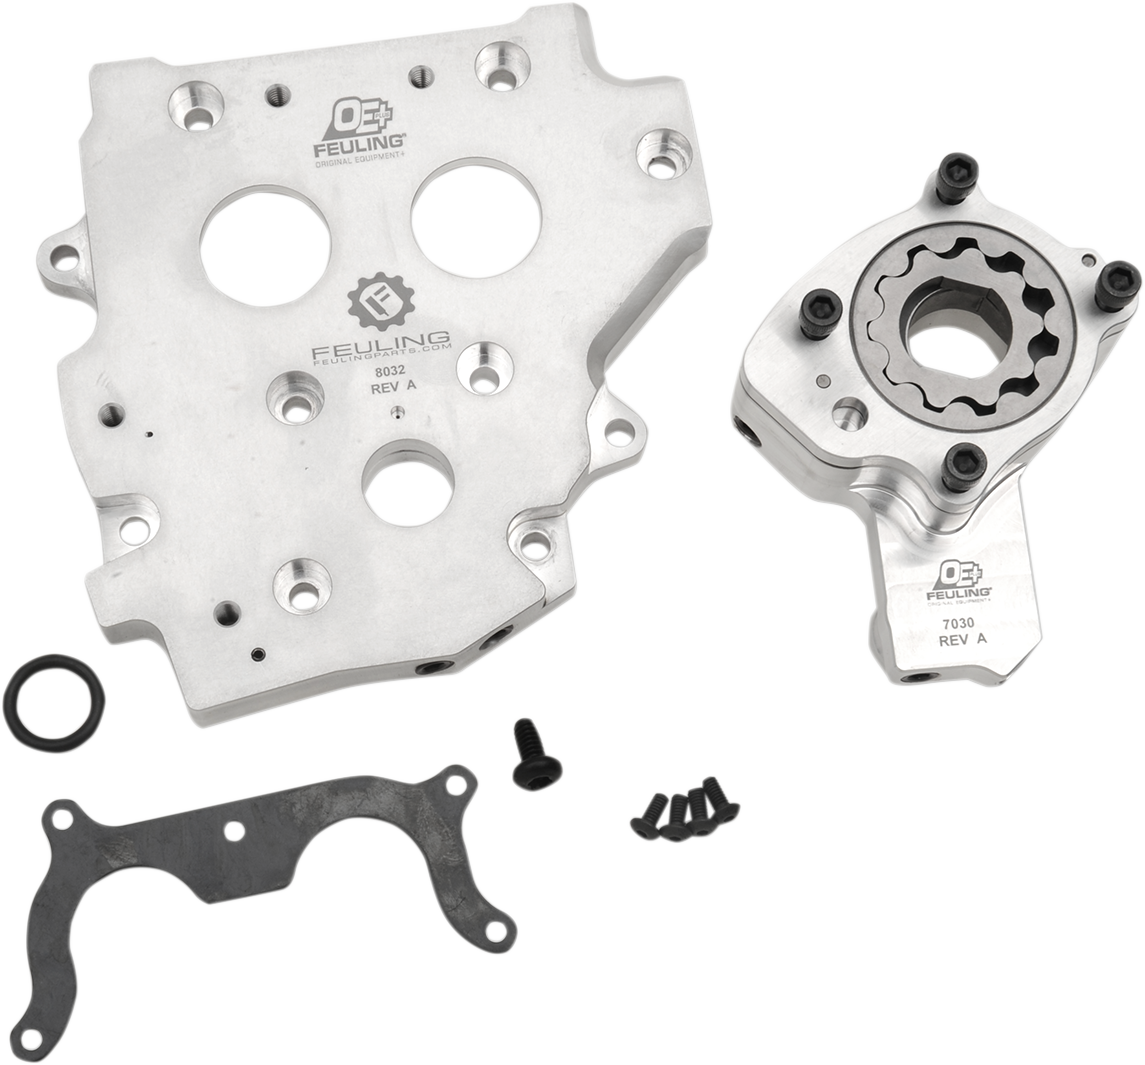 Feuling OE+ Cam Plate Oil Pump Kit 1999-2006 Harley Dyna Softail Touring FLHR